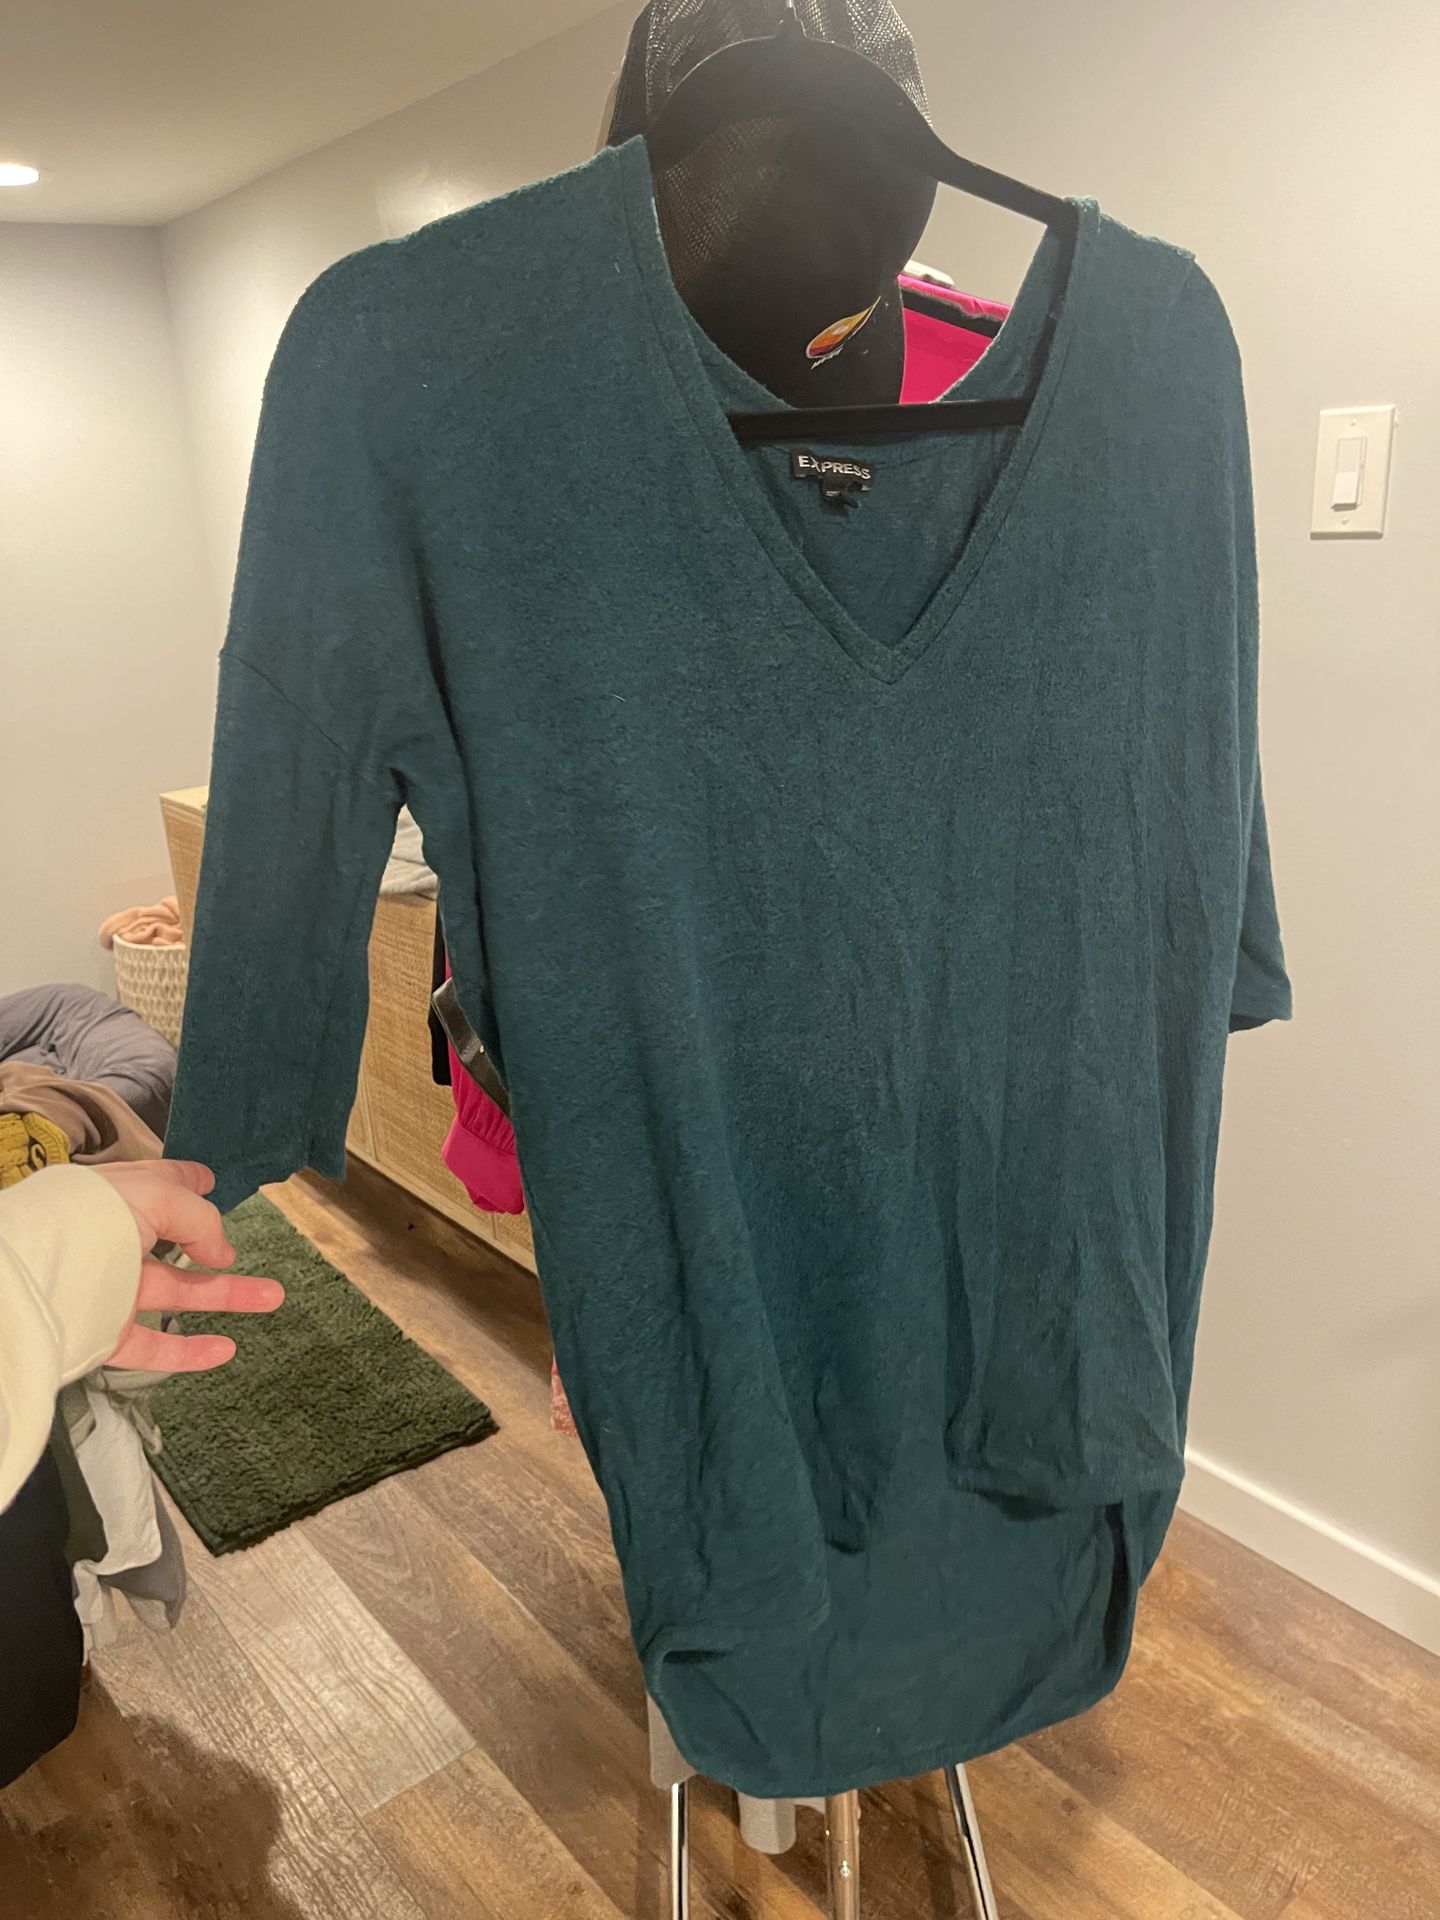 Teal High Low Sweater Women’s 